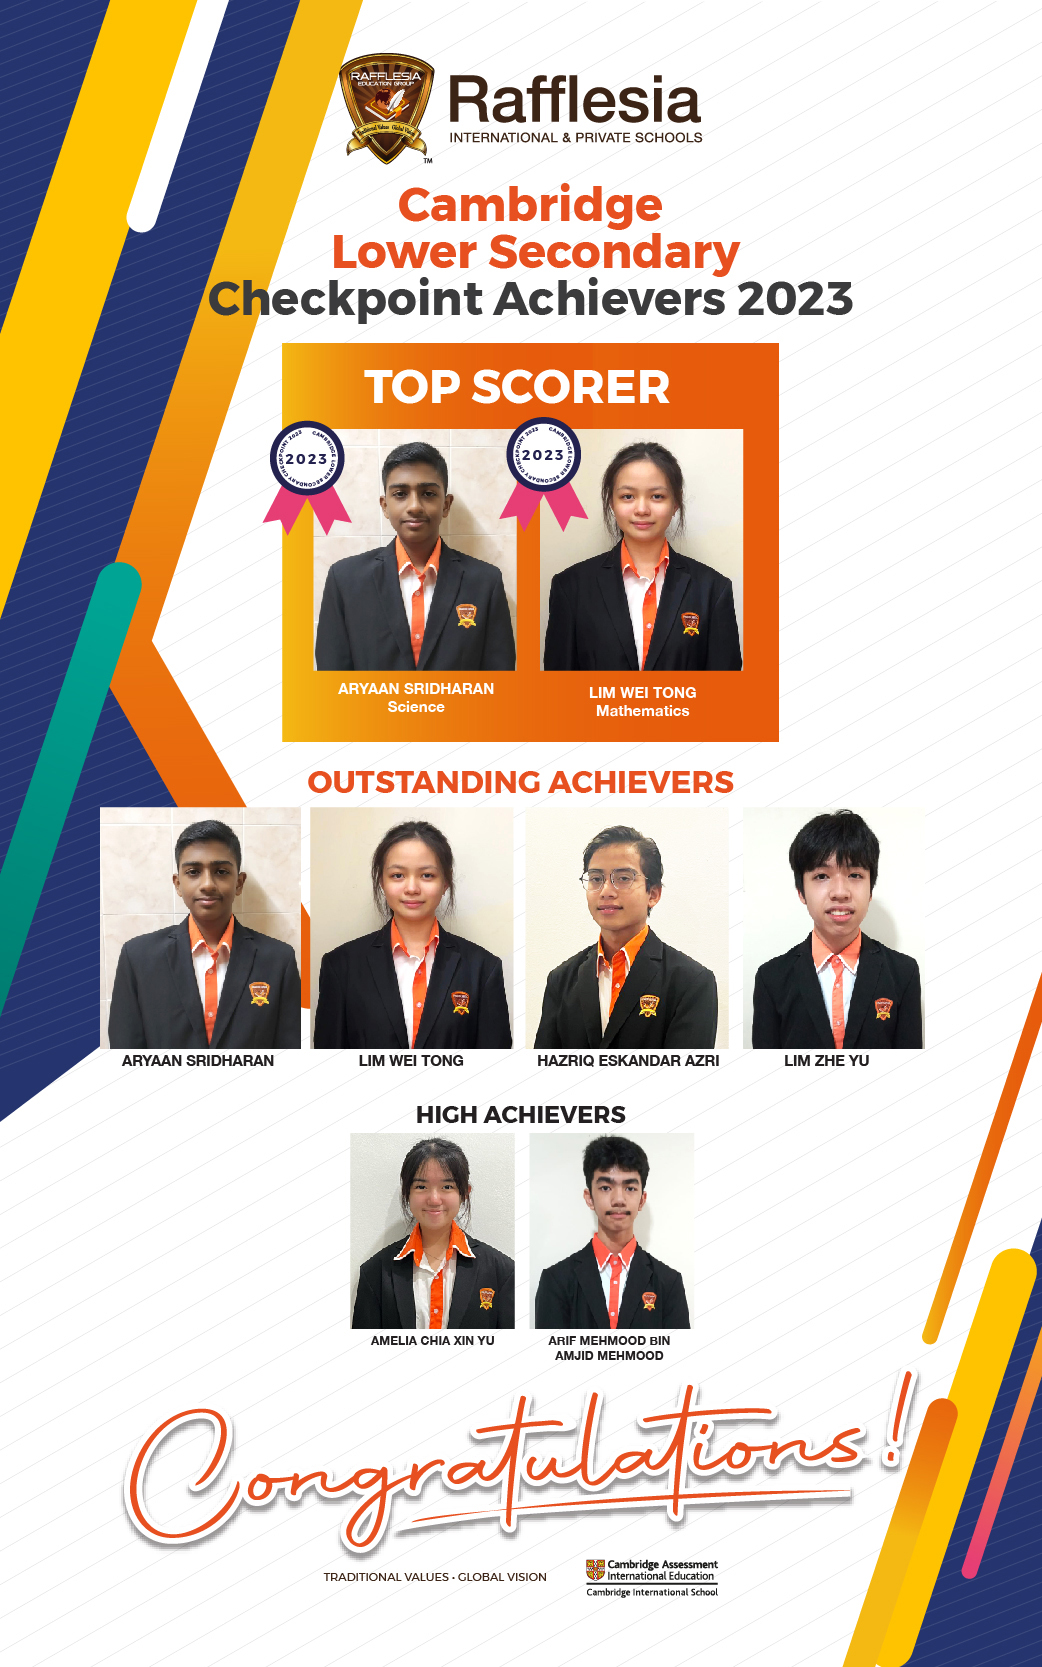 Cambridge Lower Secondary Checkpoint Achievers 2023